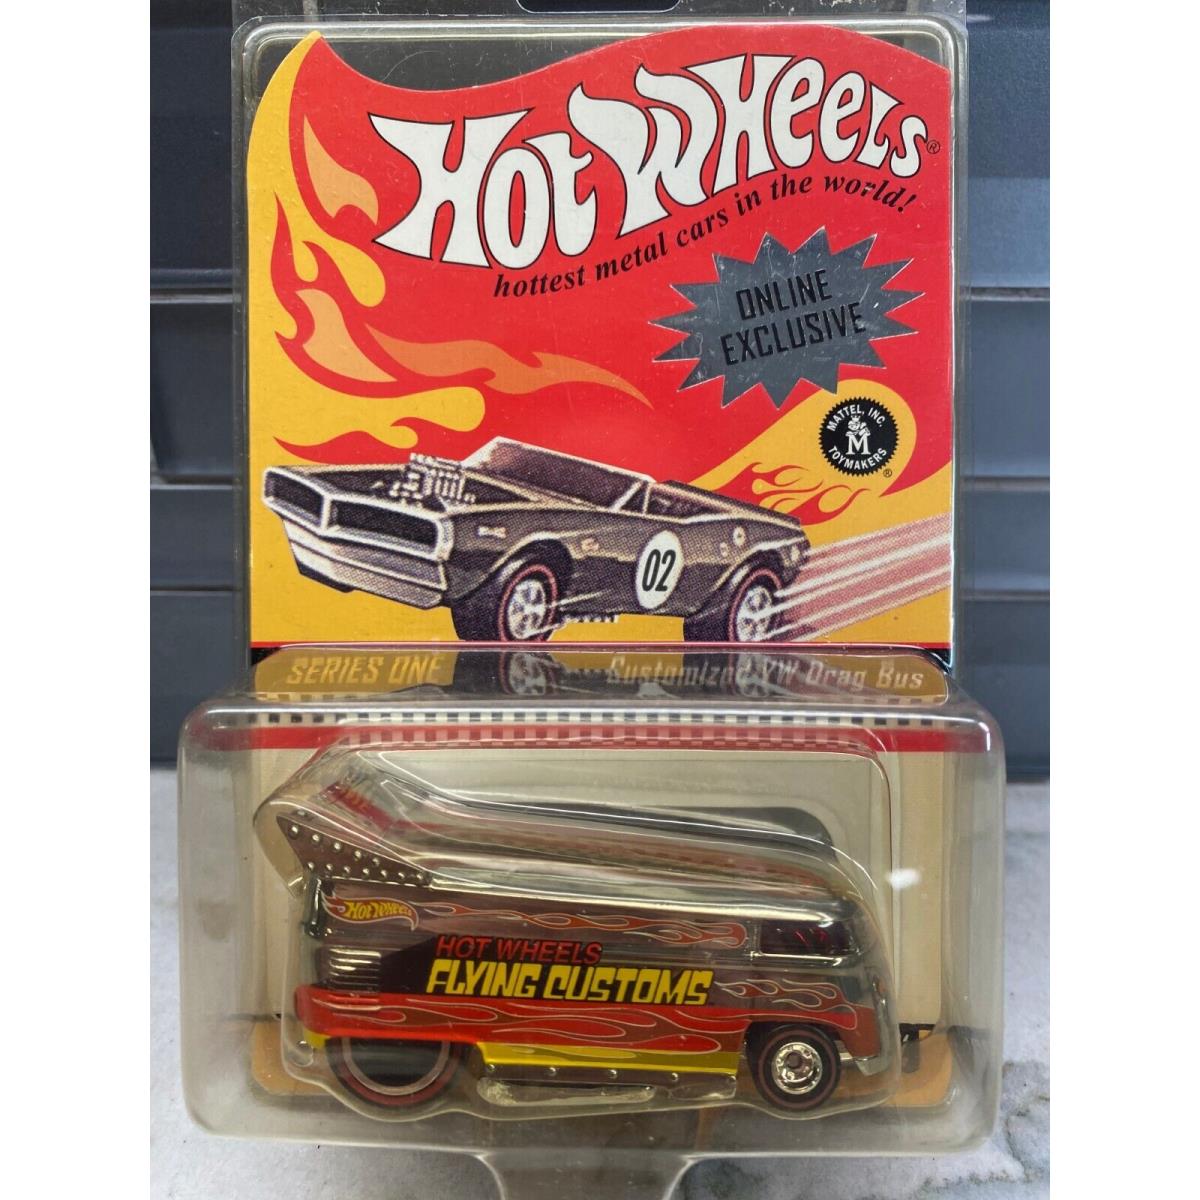 Hot Wheels 2002 Online Exclusive Flying Customs Customized VW Drag Bus xxx/10000